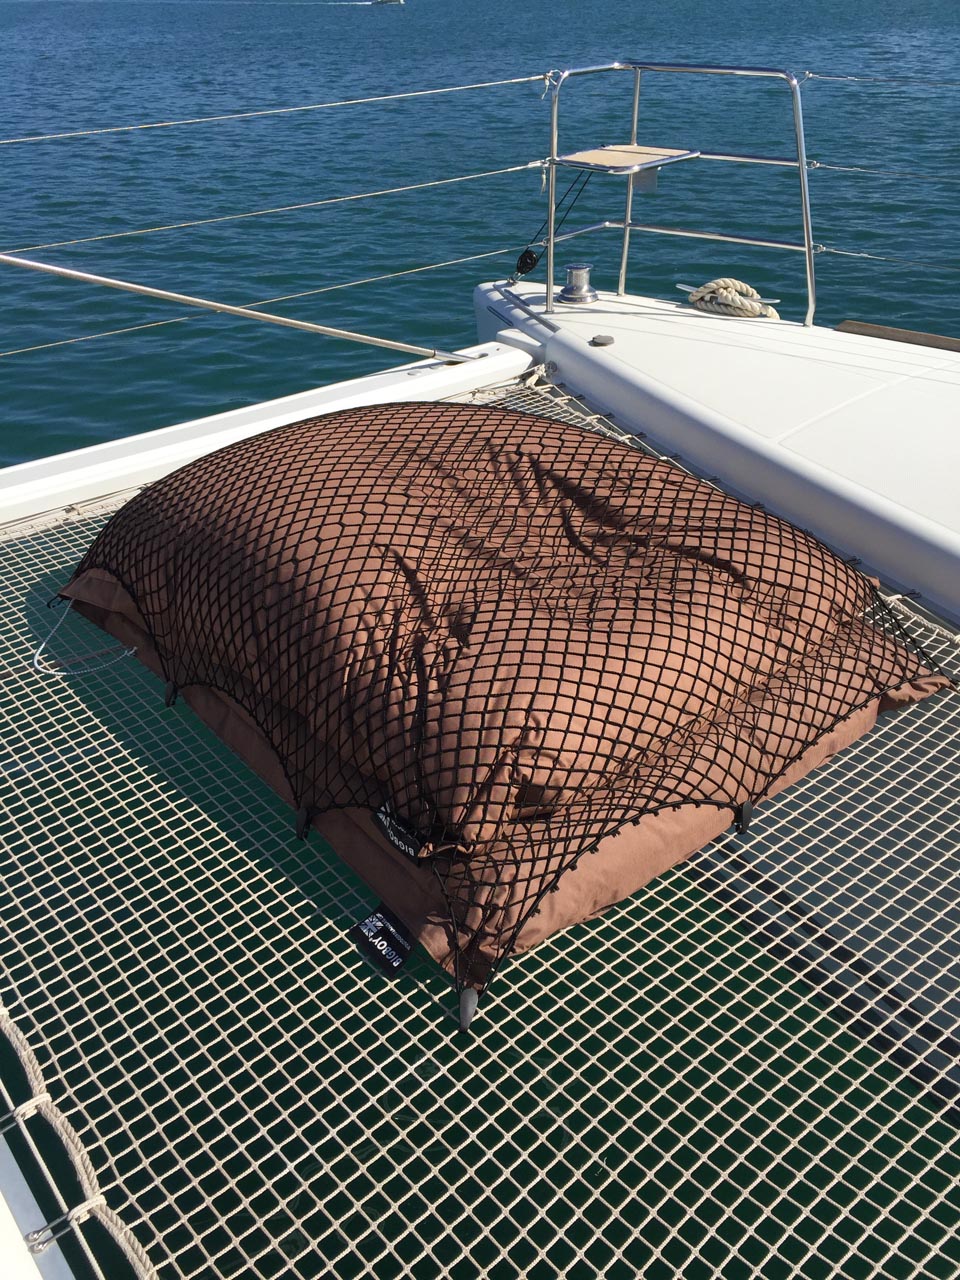 Bespoke elasticated net for covering cushions on a boat deck.